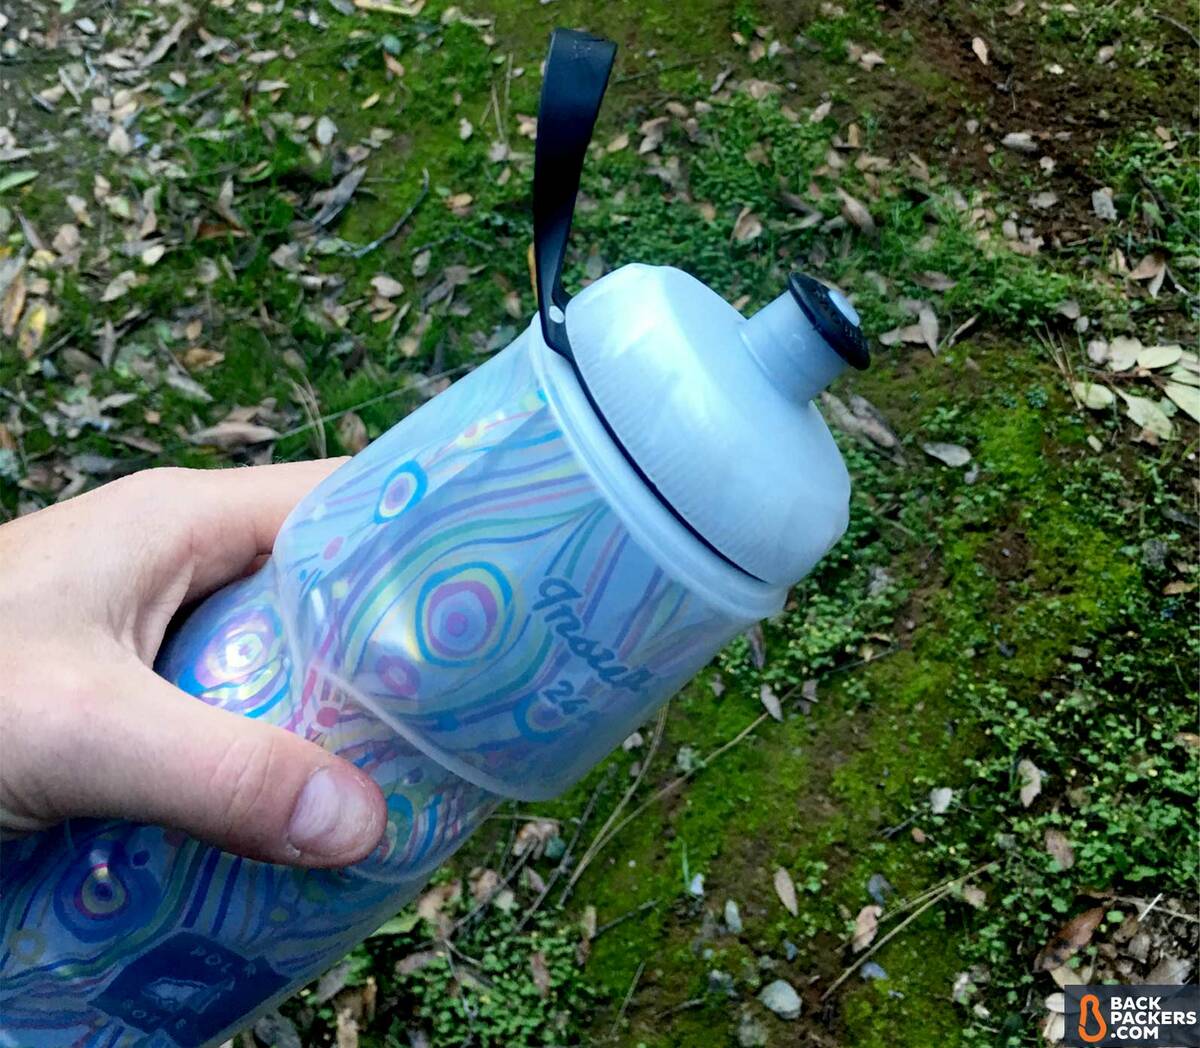 https://images.backpackers.com/i/1600/-/70cab5929bec00f84dab5498588e9c35/backpackers.com/wp-content/uploads/2017/12/Polar-Bottle-Insulated-Sport-review-leash--1024x894.jpg